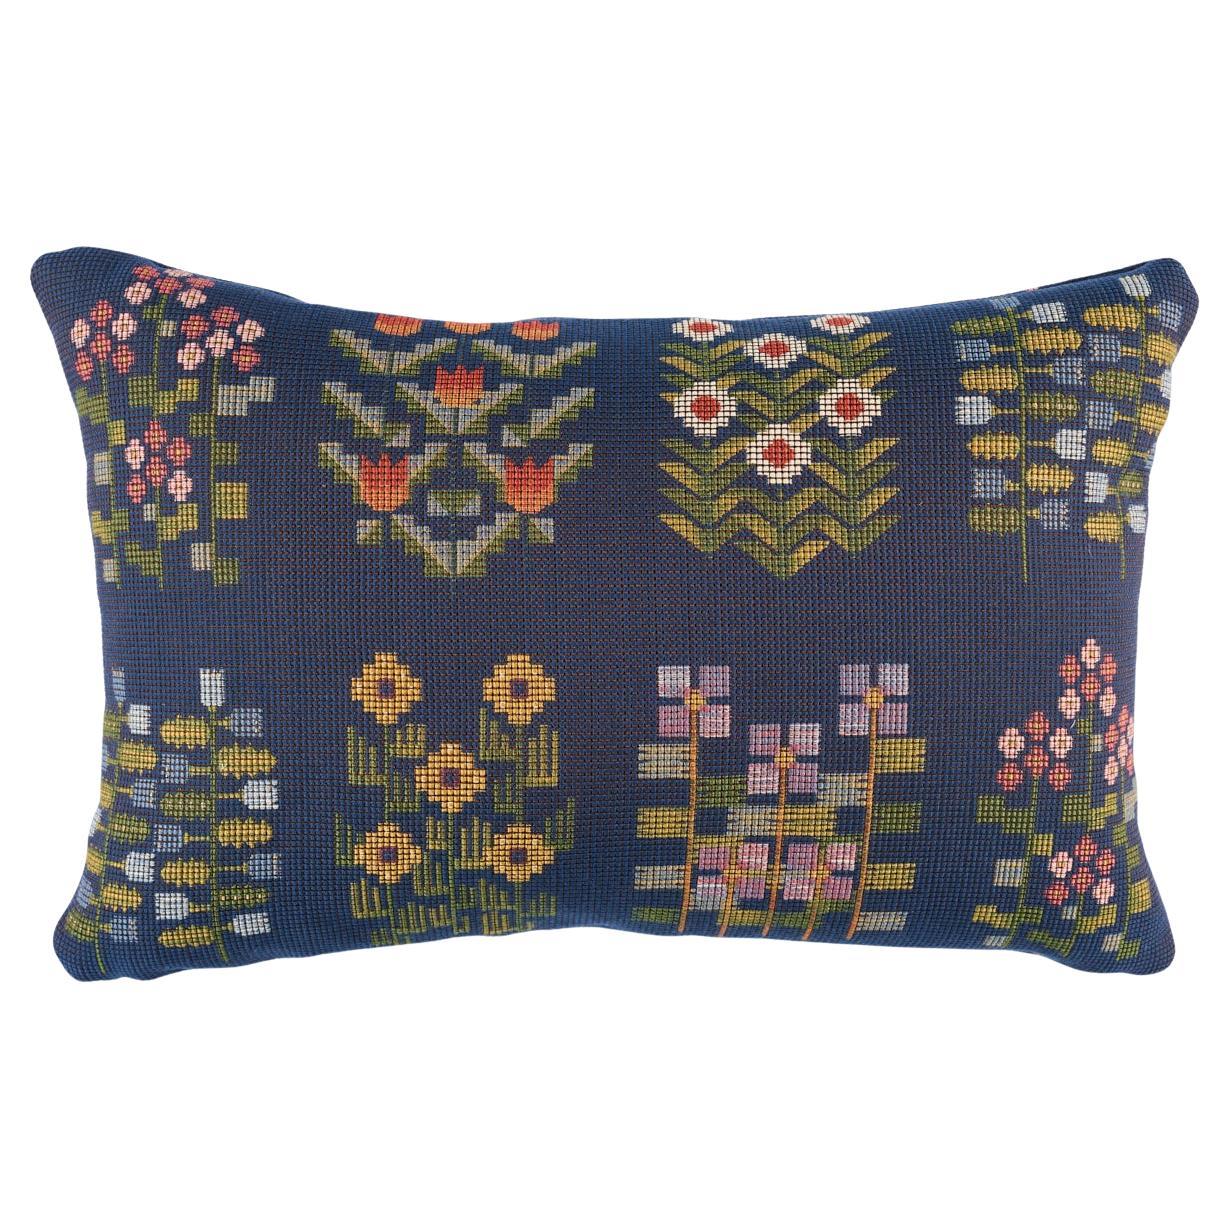 Schumacher Annika Floral Tapestry Pillow 18x12" in Multi on Navy For Sale